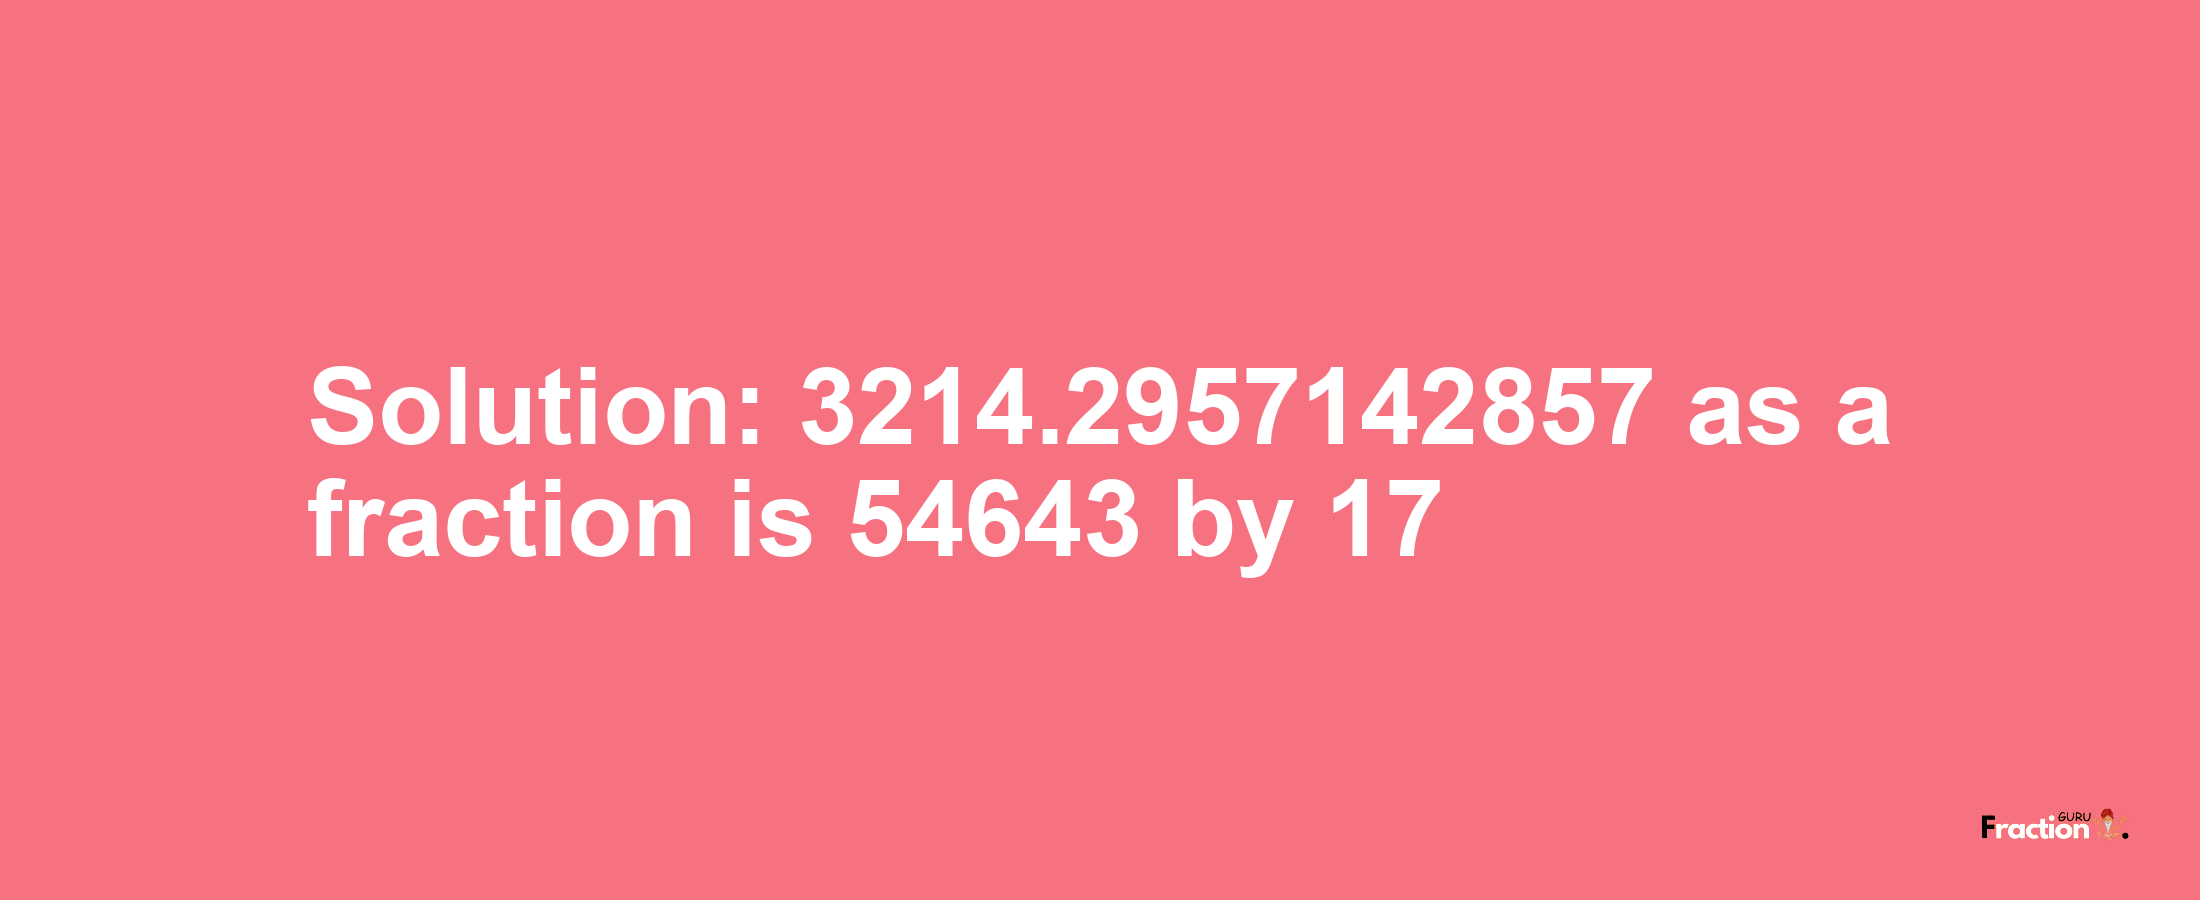 Solution:3214.2957142857 as a fraction is 54643/17